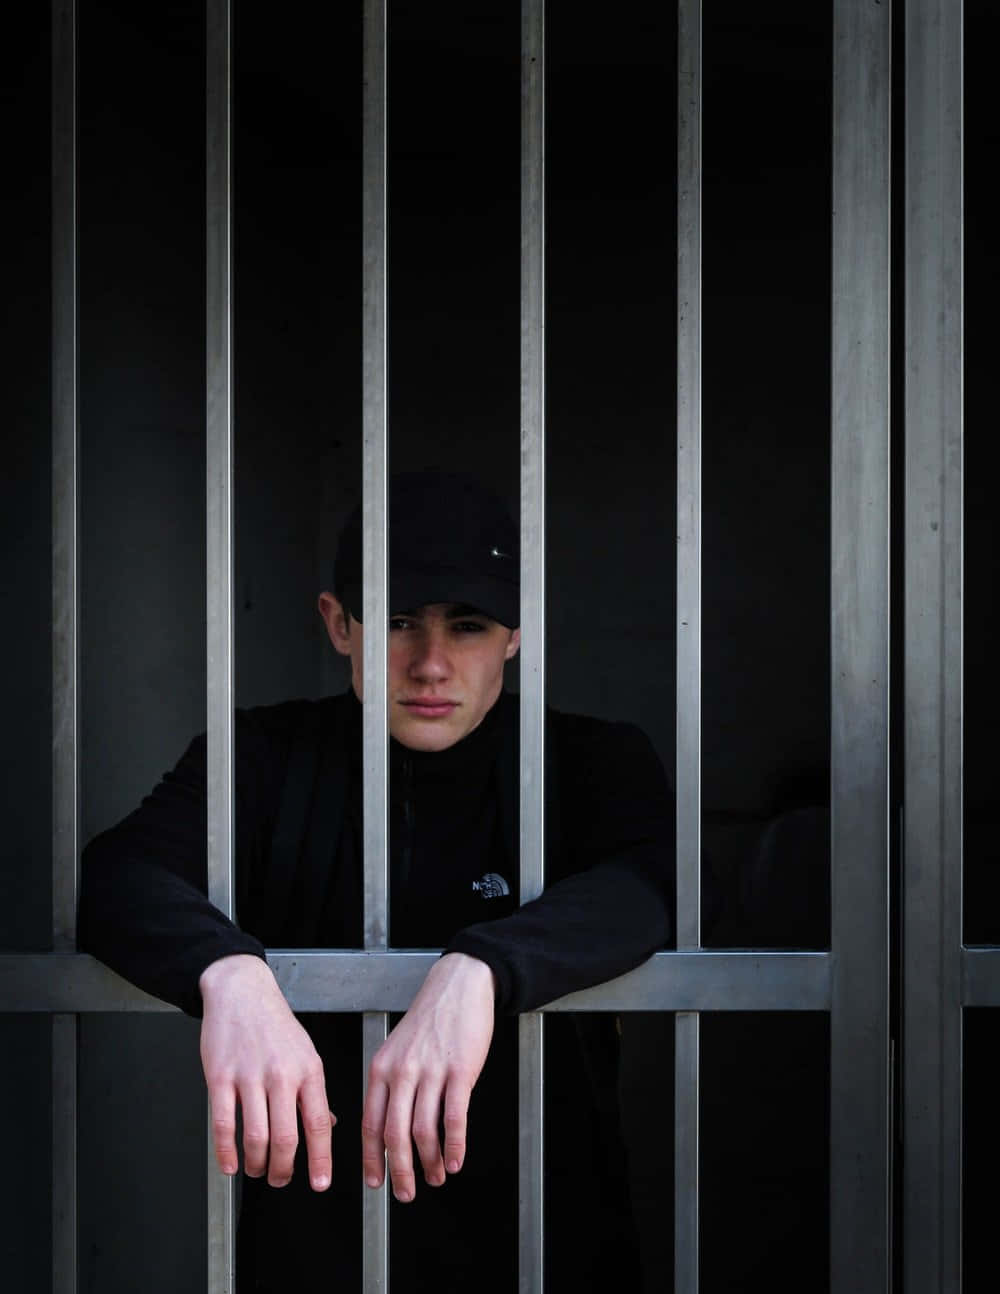 A Man In A Prison Cell